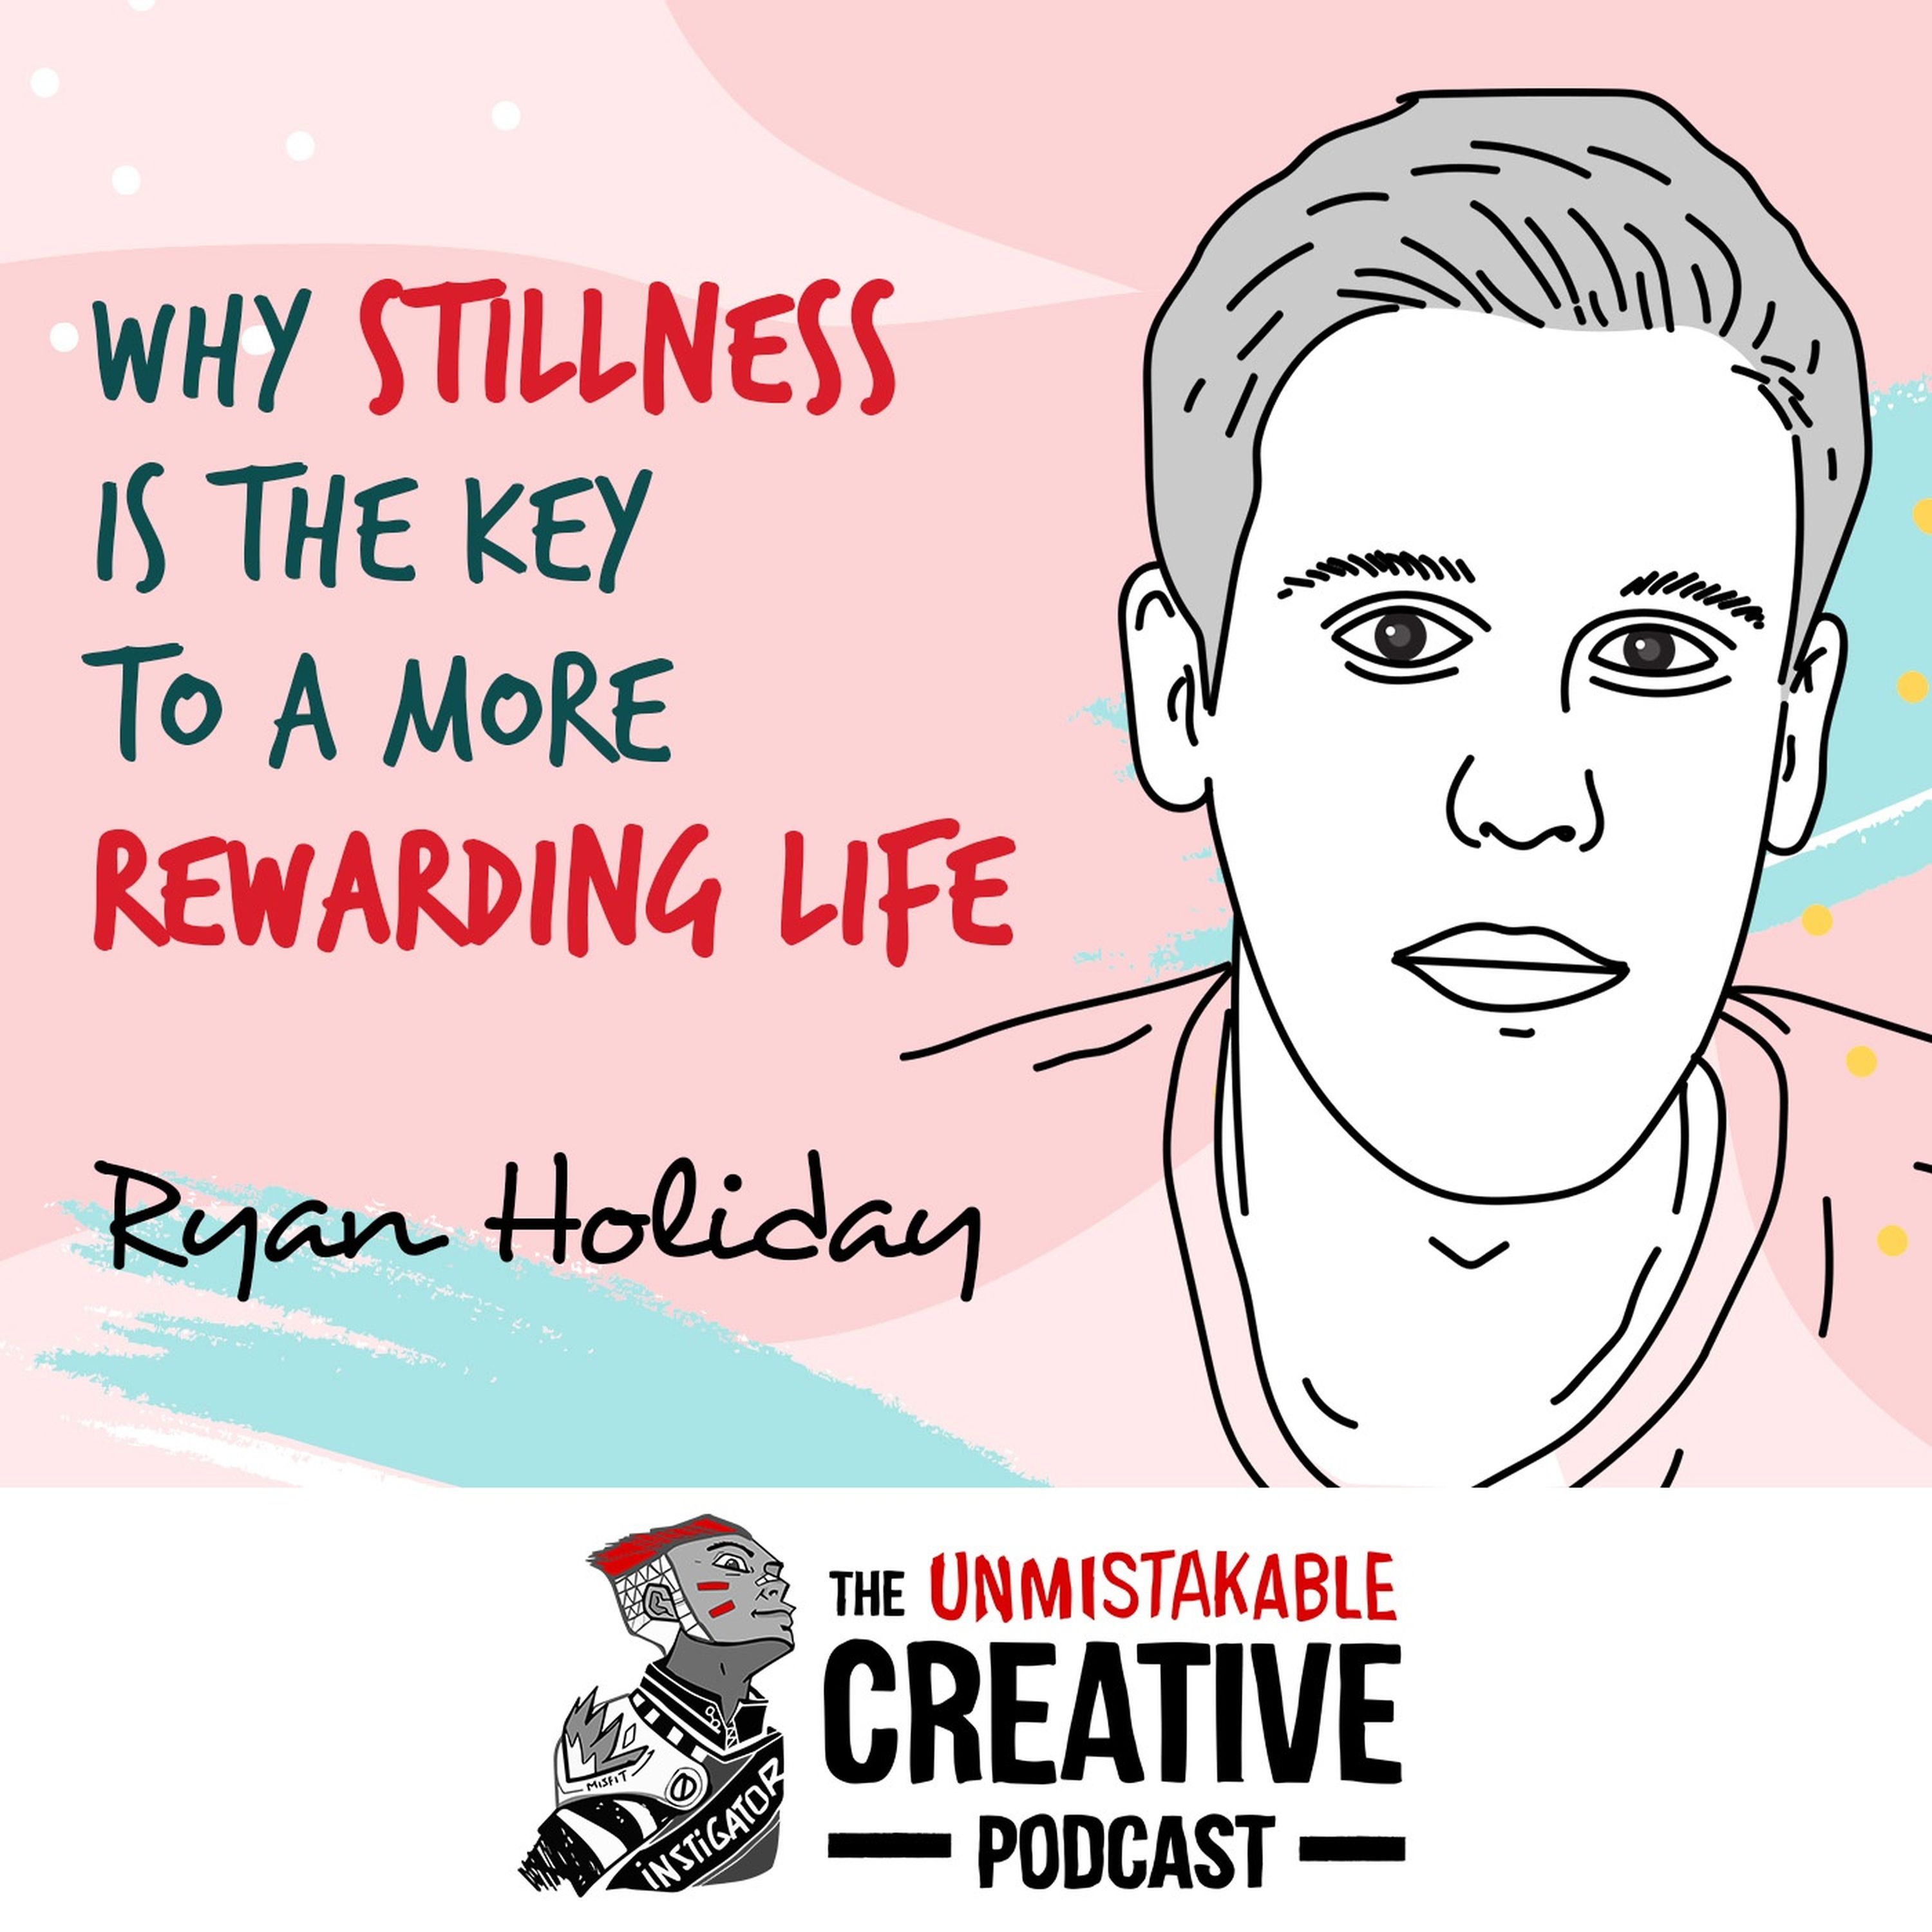 Ryan Holiday: Why Stillness is the Key to a More Rewarding Life Image